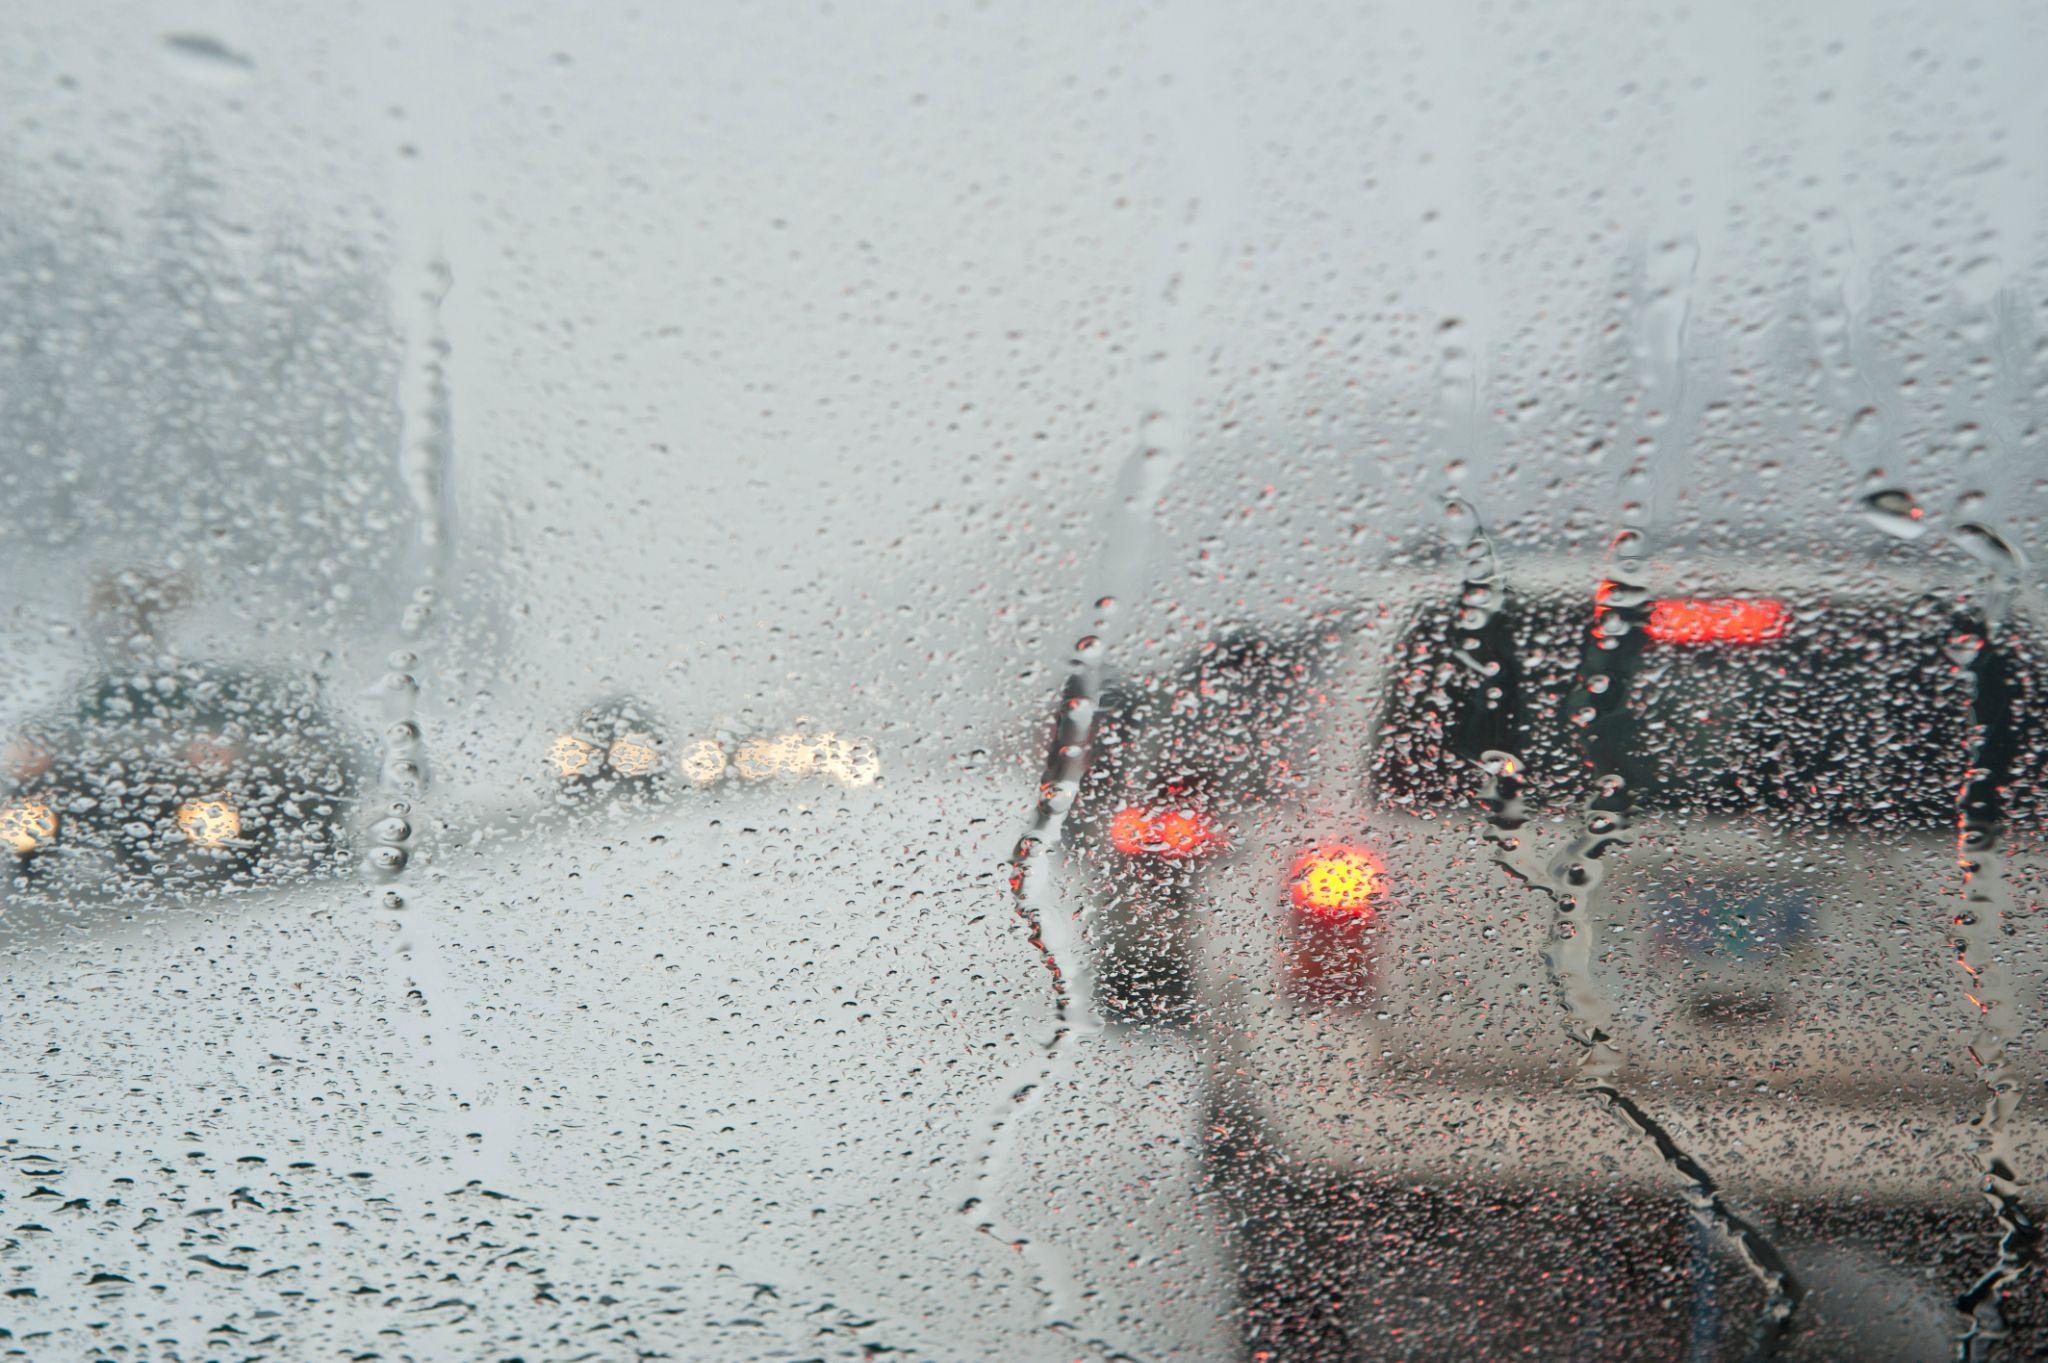 cars in traffic during heavy rain and snow